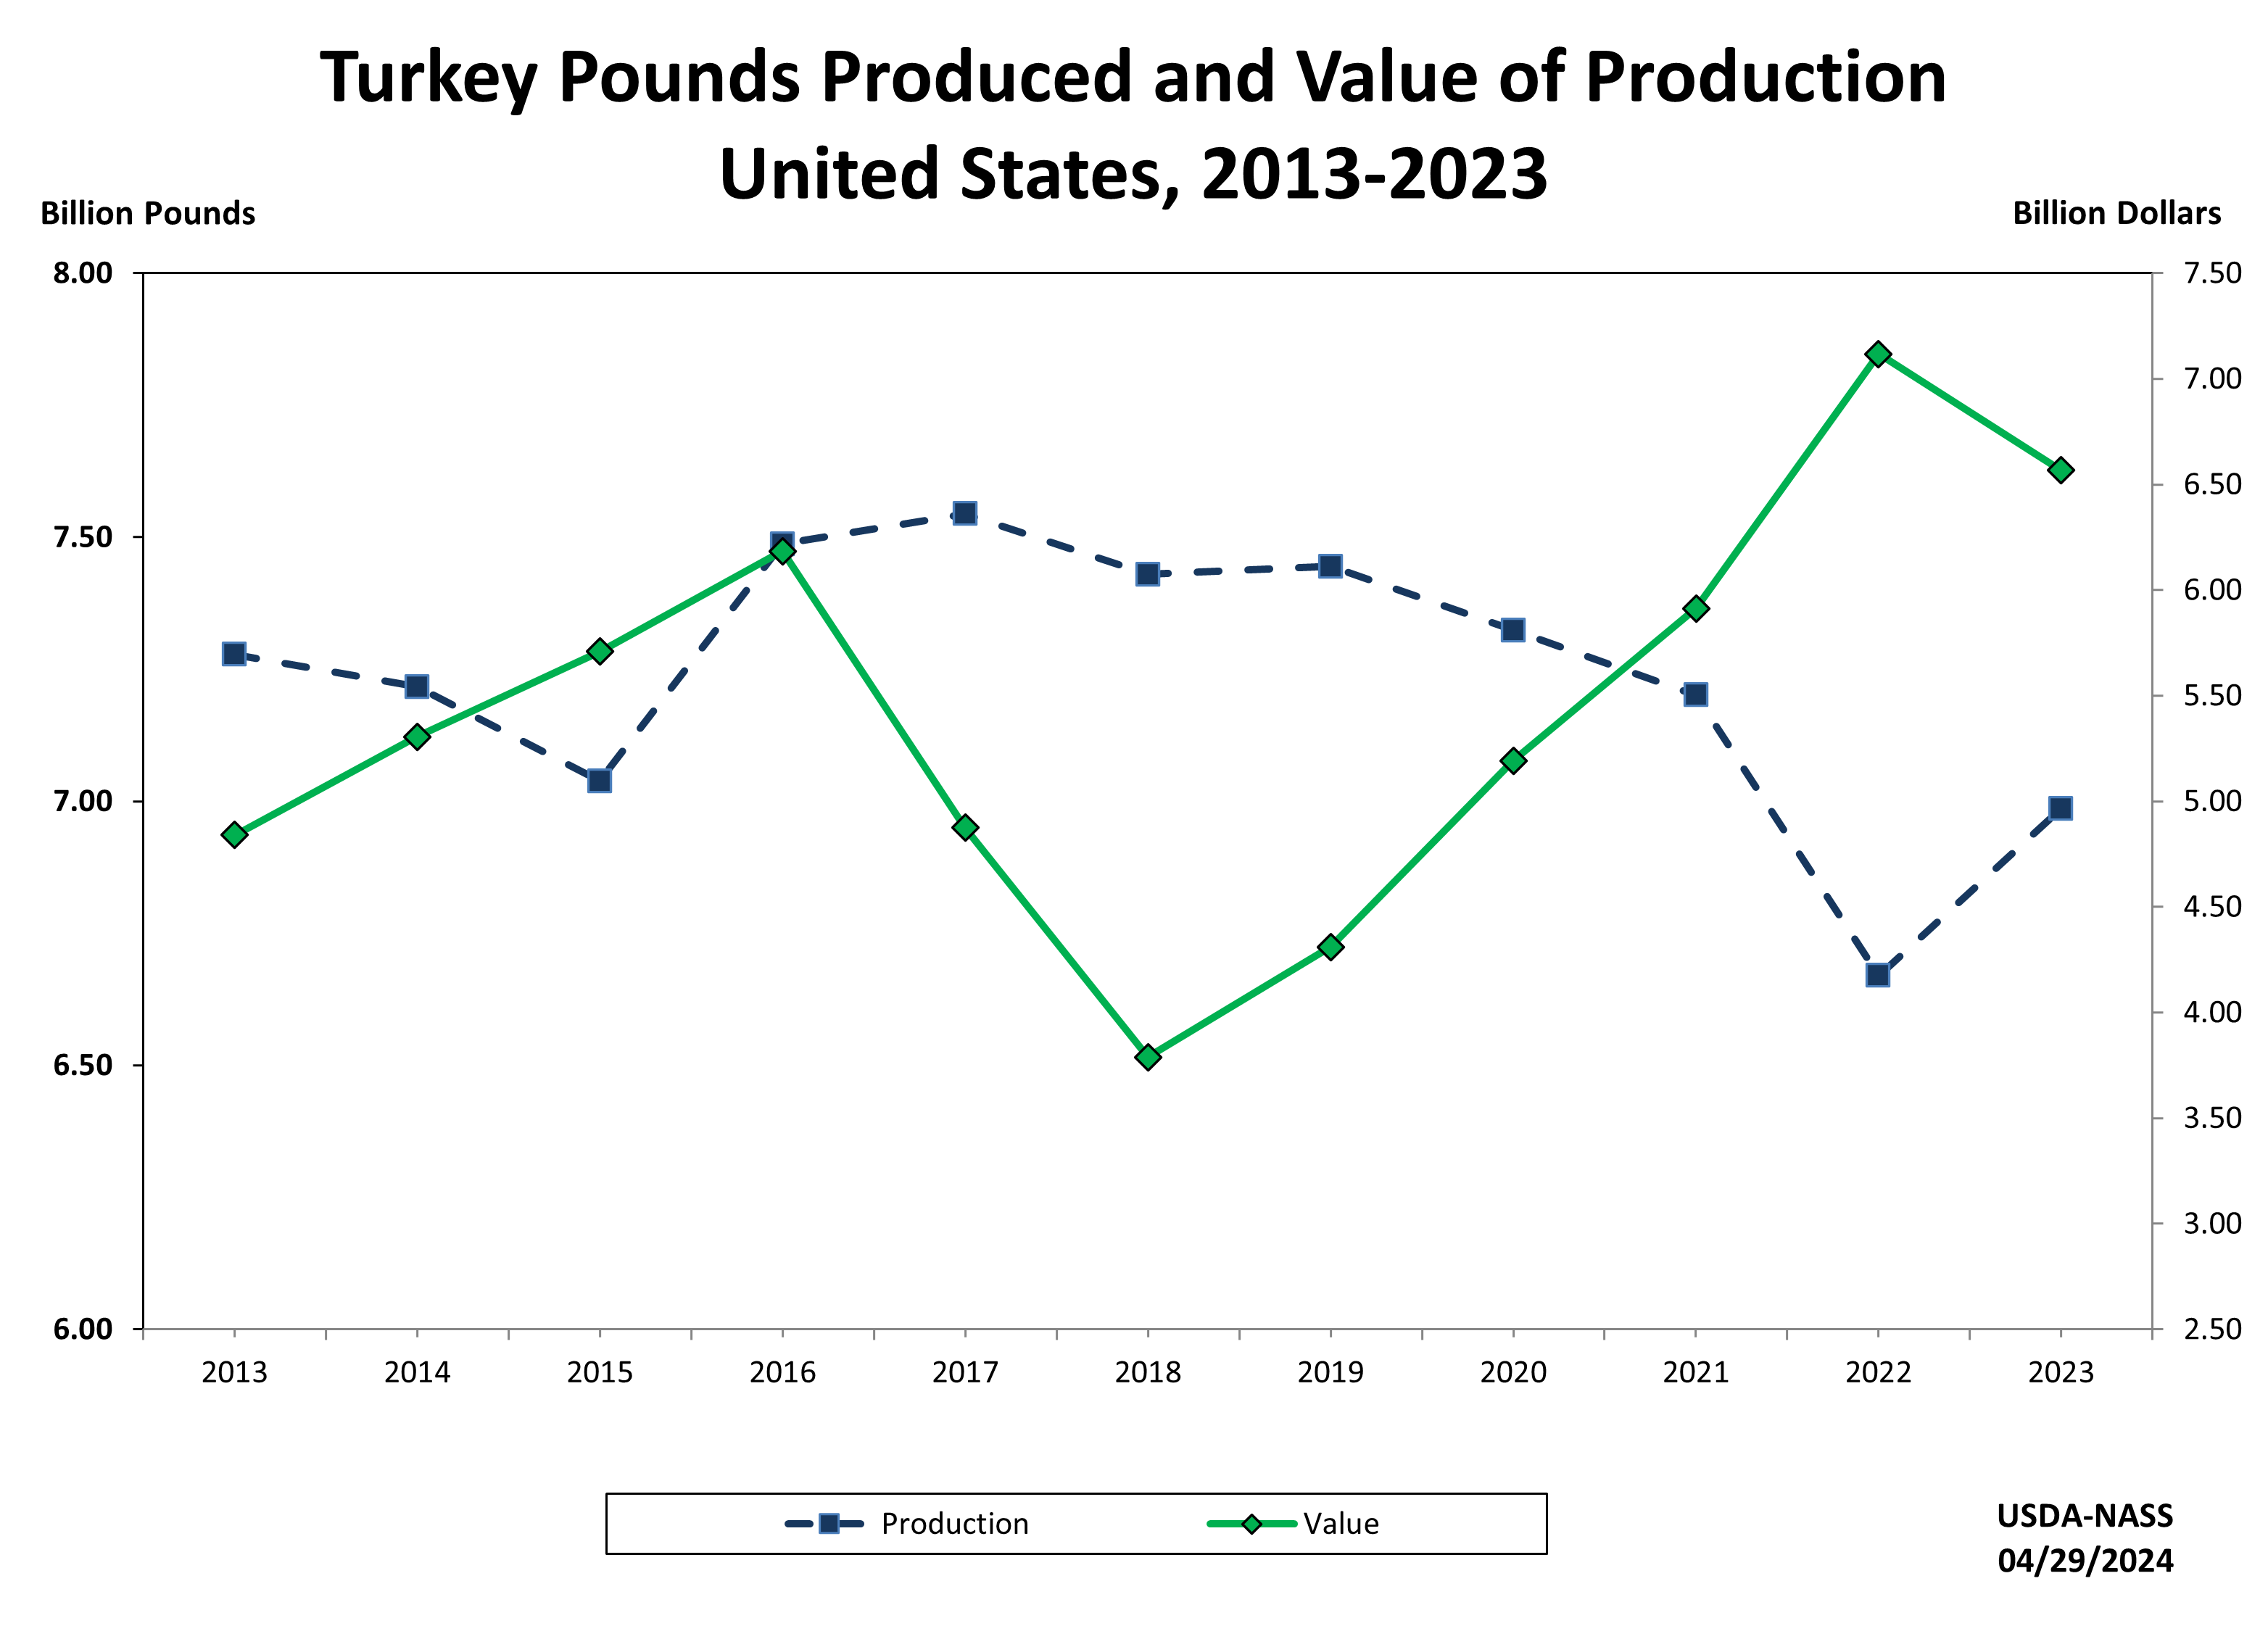 Turkey Production and Value by Year